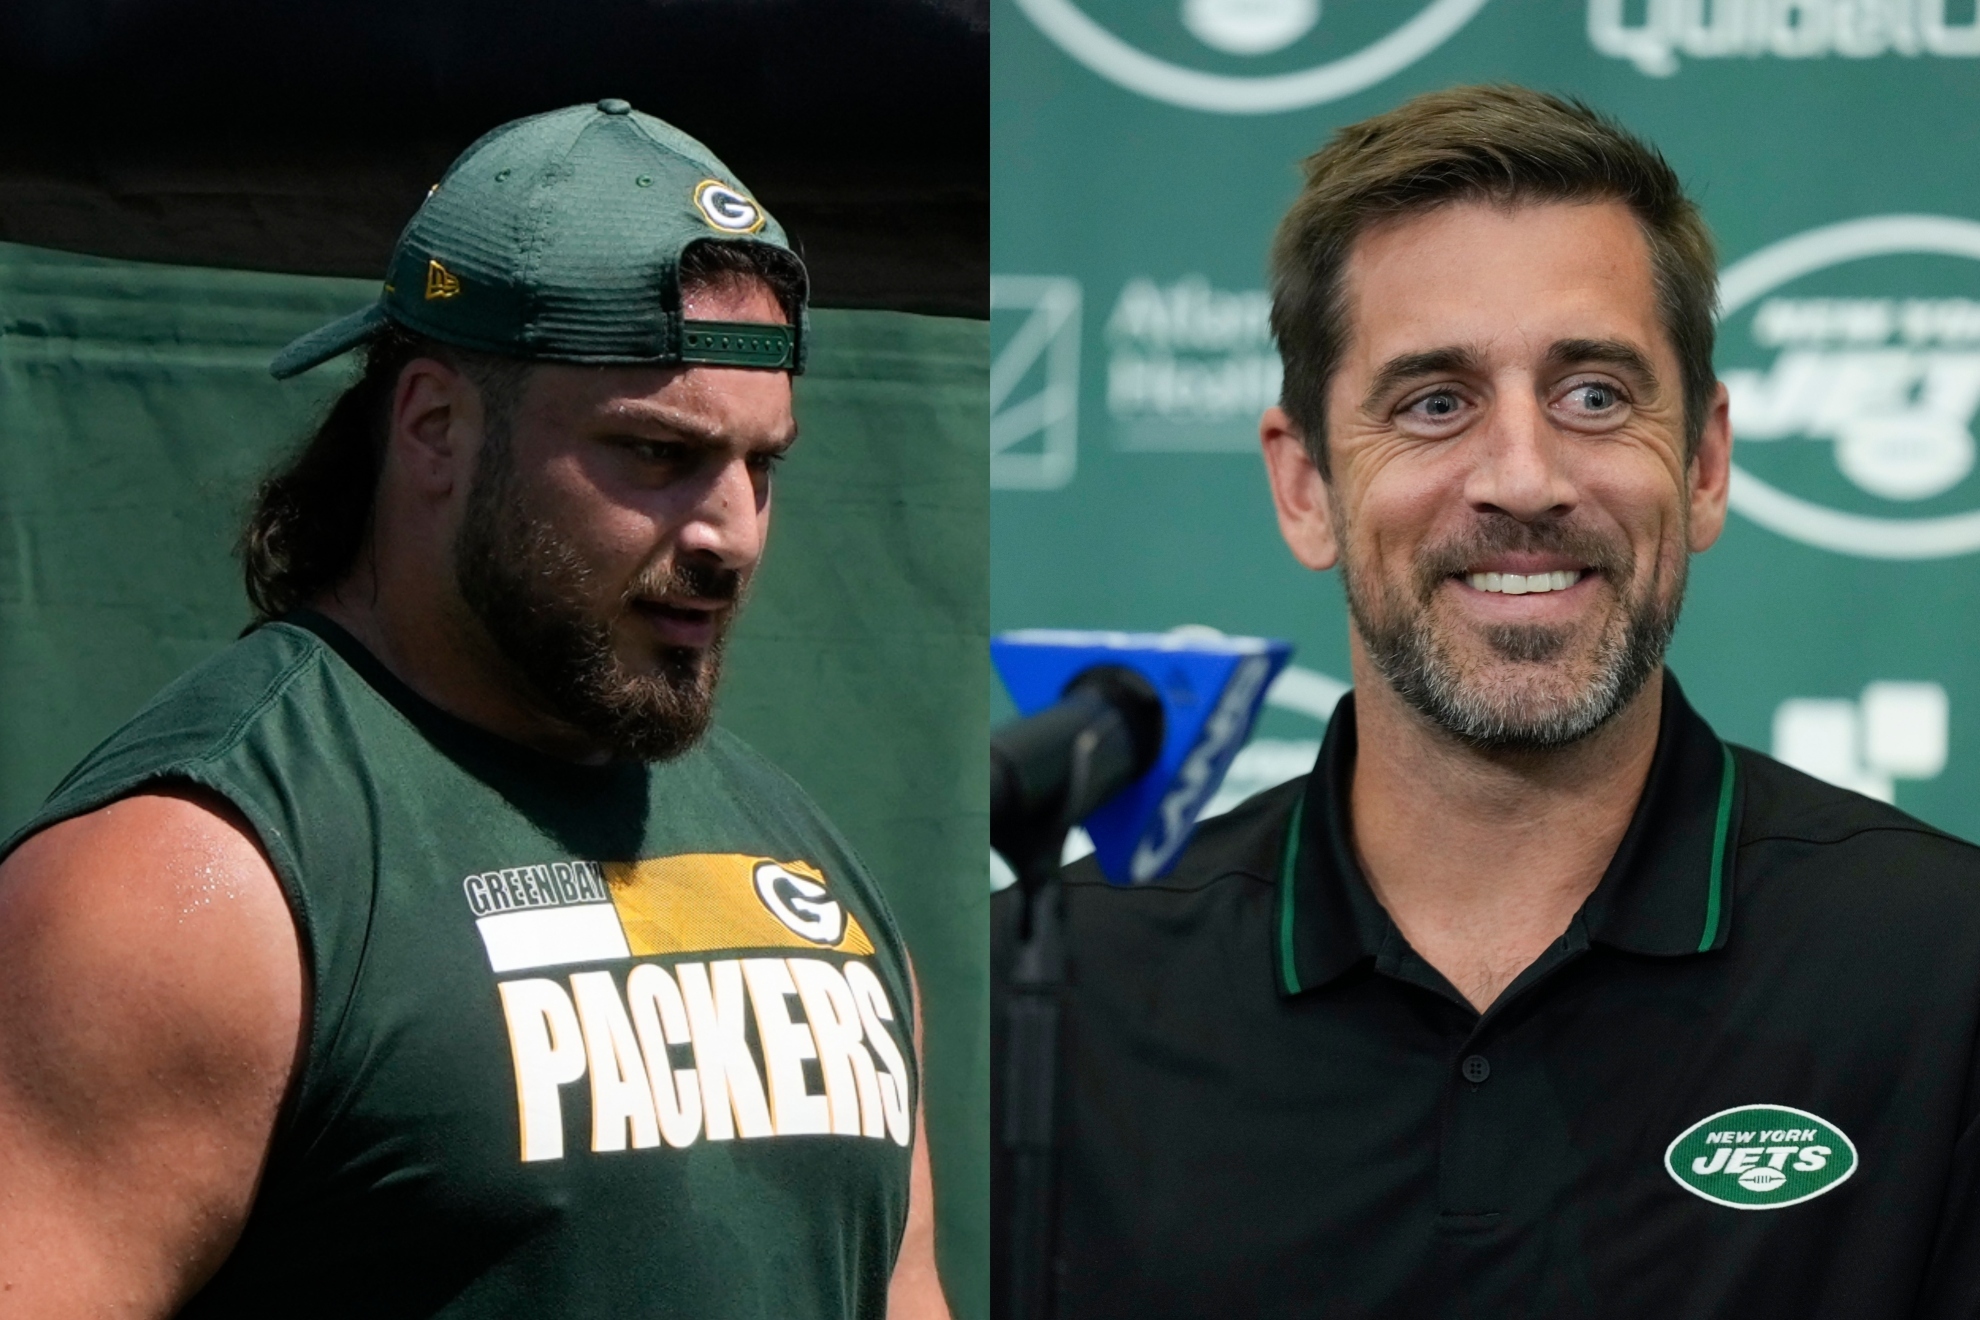 Aaron Rodgers and David Bakhtiari express disappointment on Feinstein returning to Senate